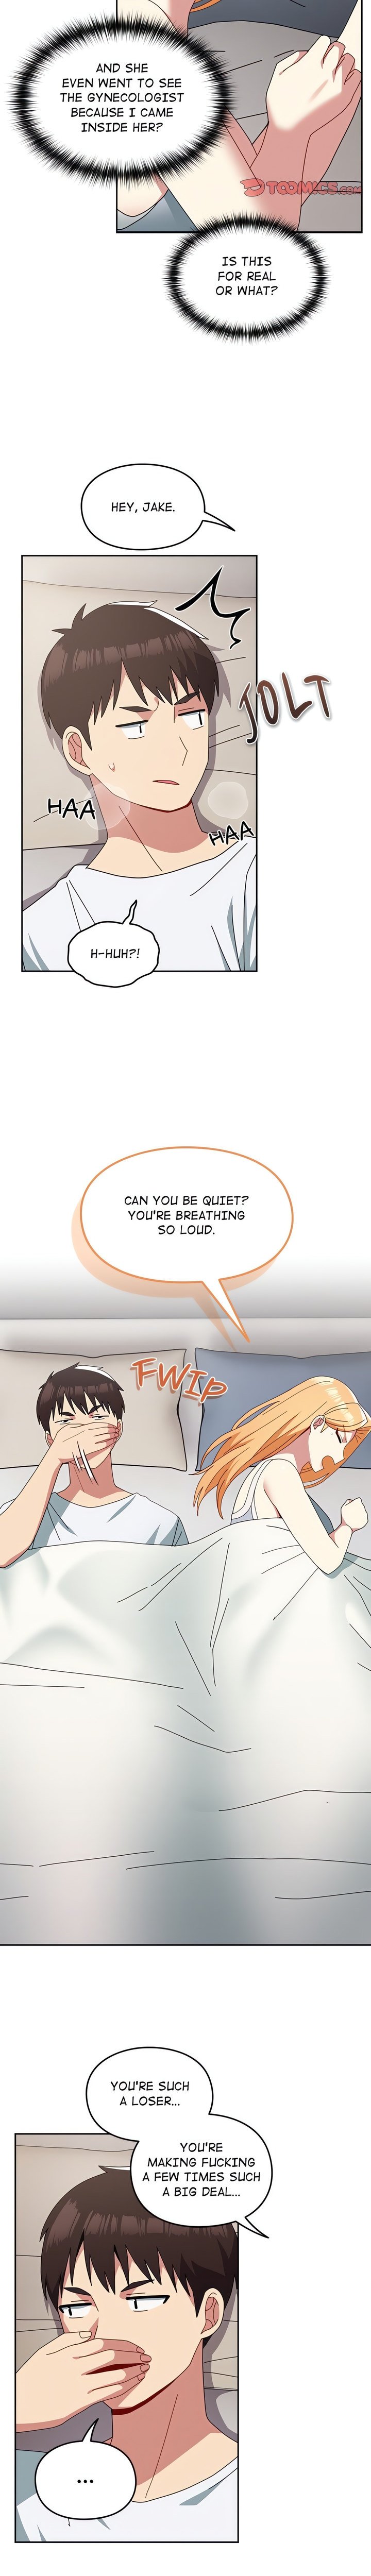 when-did-we-start-dating-chap-47-9